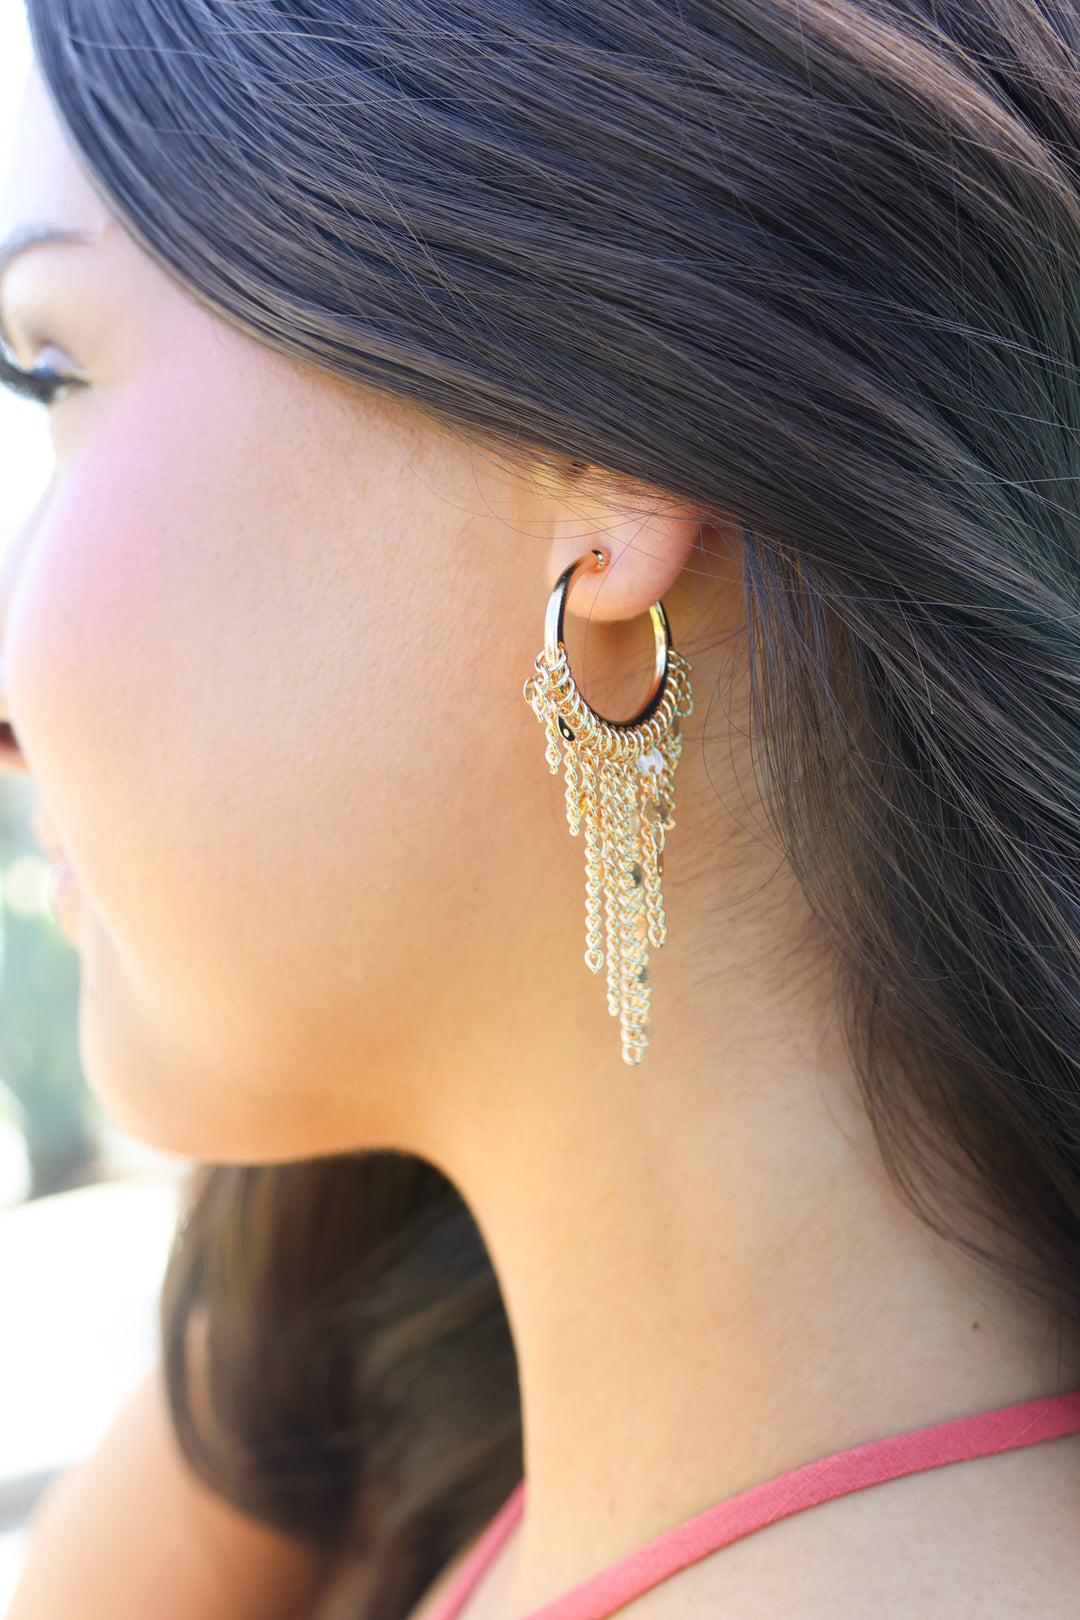 Fame and Fourtune Earrings - ShopSpoiled